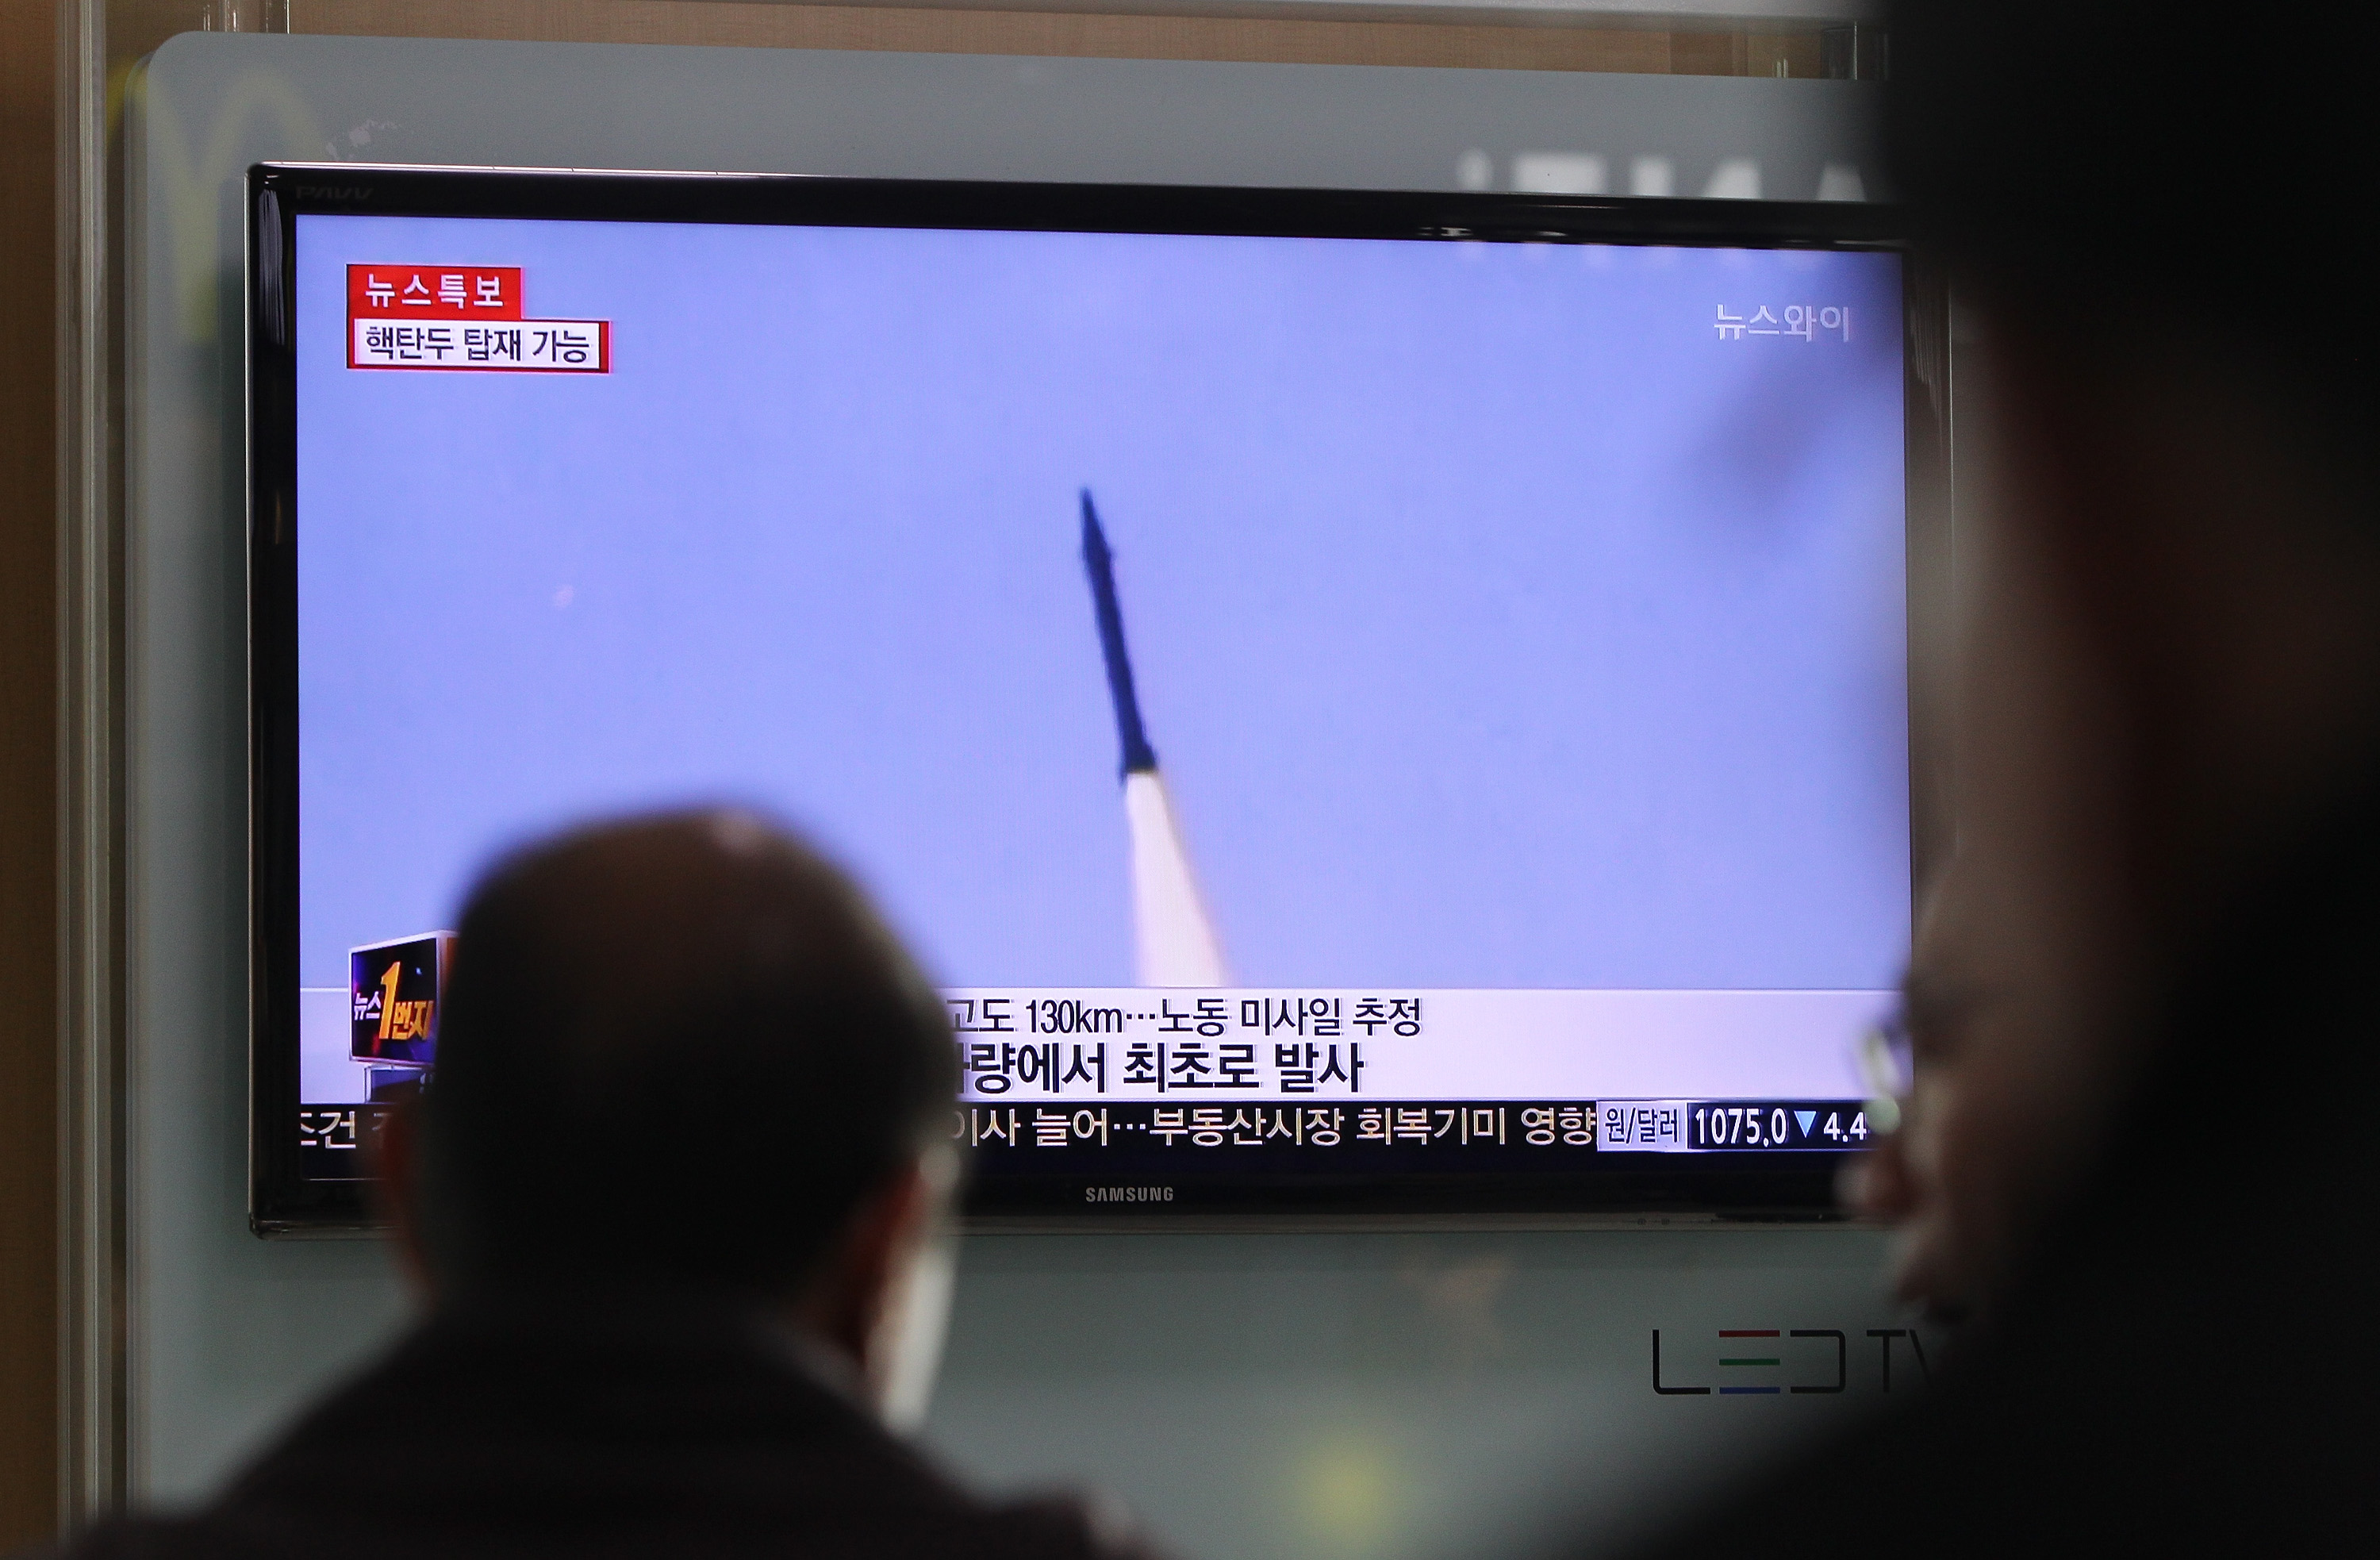 South Korea Reacts To North Korean Missile Launch